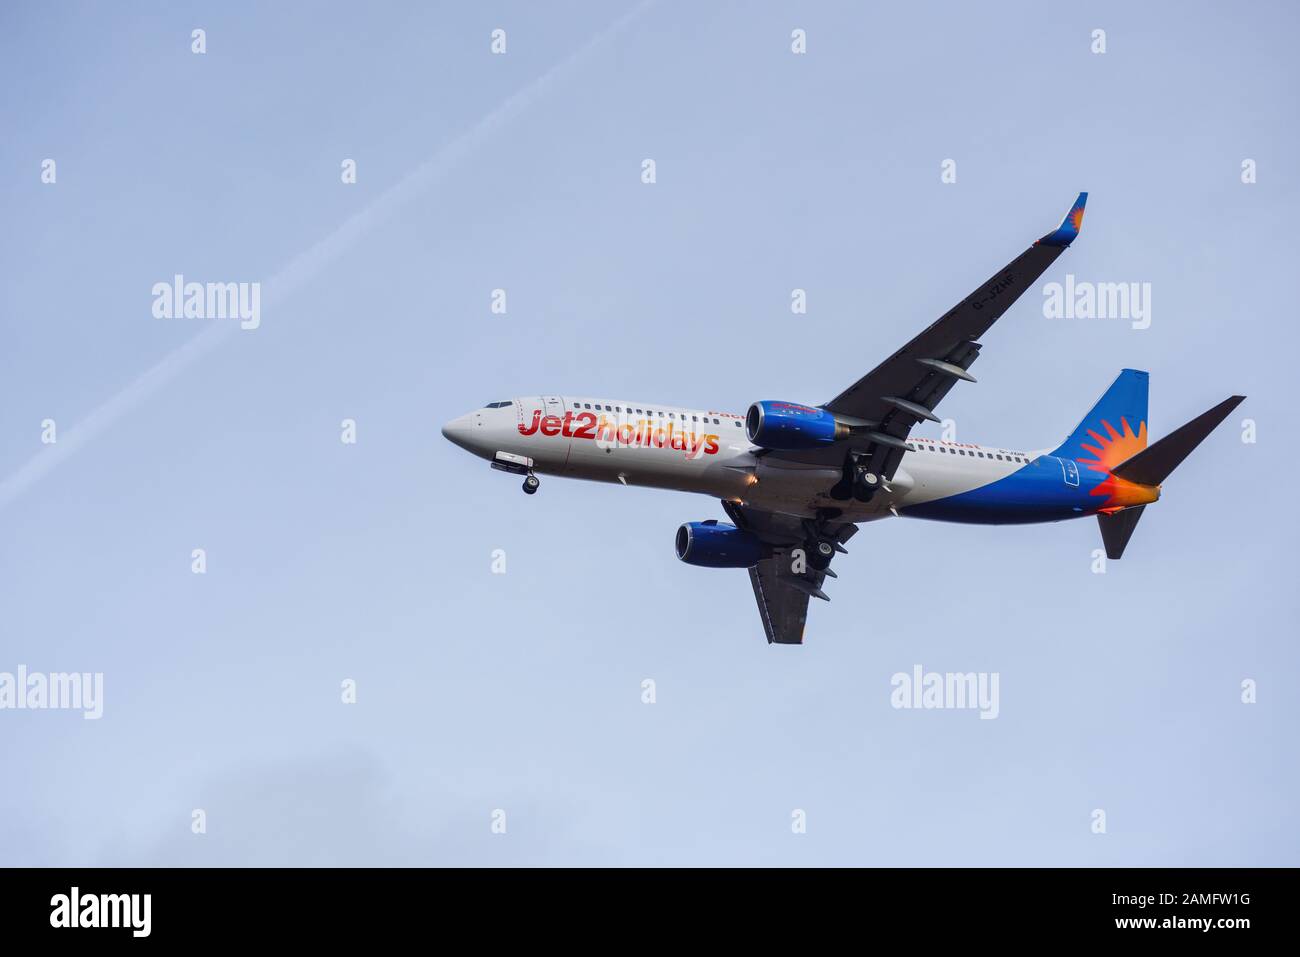 Jet 2 Holidays Airliner Approaching East Midlands Airport,UK. Stock Photo